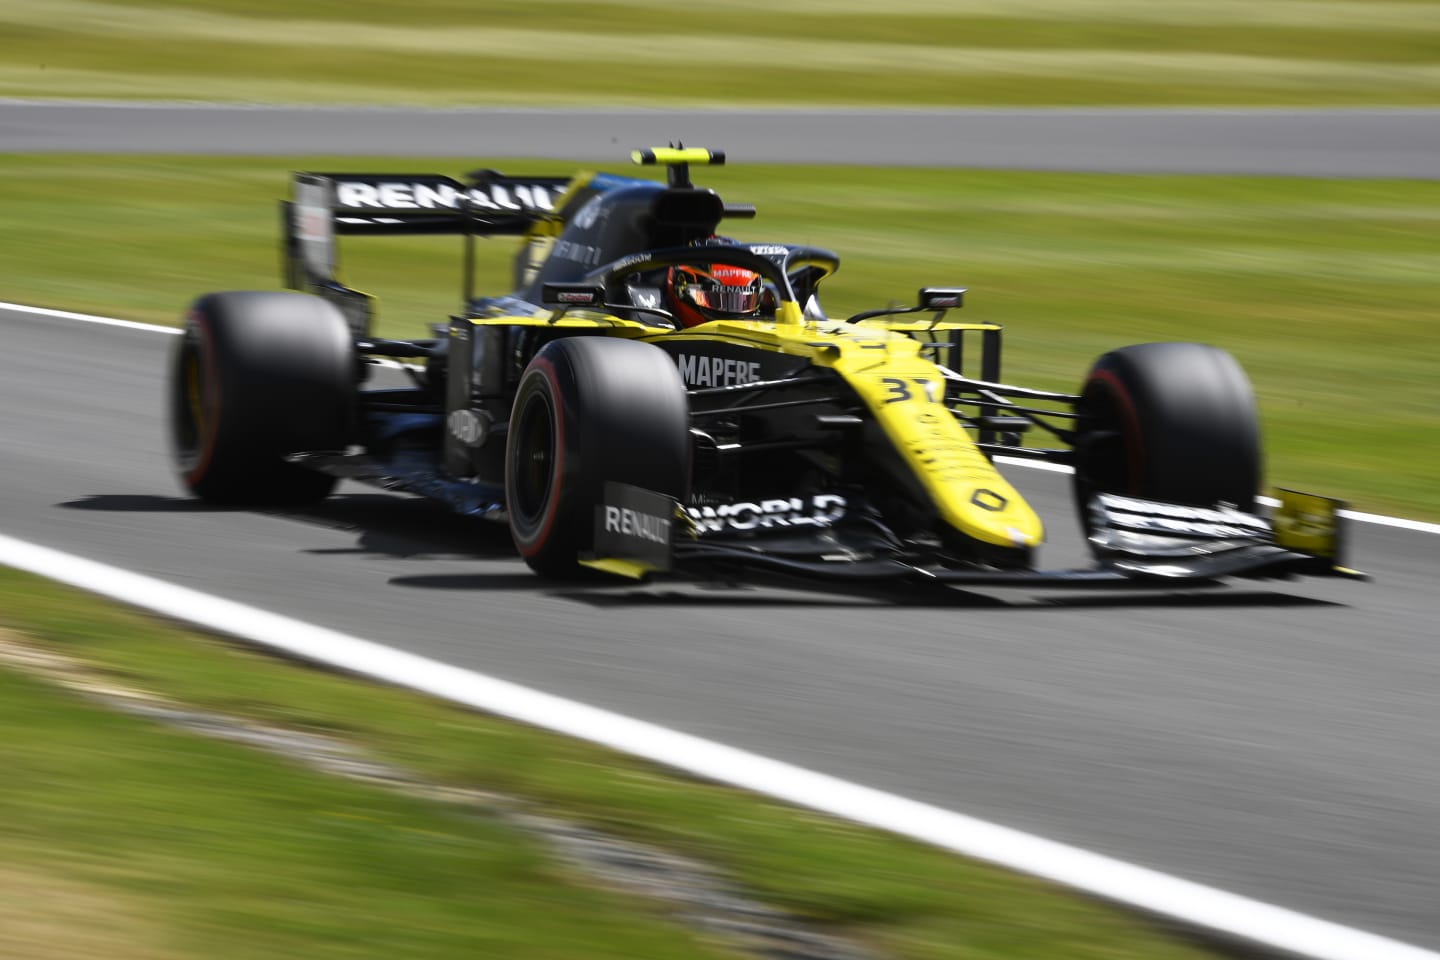 NORTHAMPTON, ENGLAND - AUGUST 01: Esteban Ocon of France driving the (31) Renault Sport Formula One Team RS20 during qualifying for the F1 Grand Prix of Great Britain at Silverstone on August 01, 2020 in Northampton, England. (Photo by Rudy Carezzevoli/Getty Images)